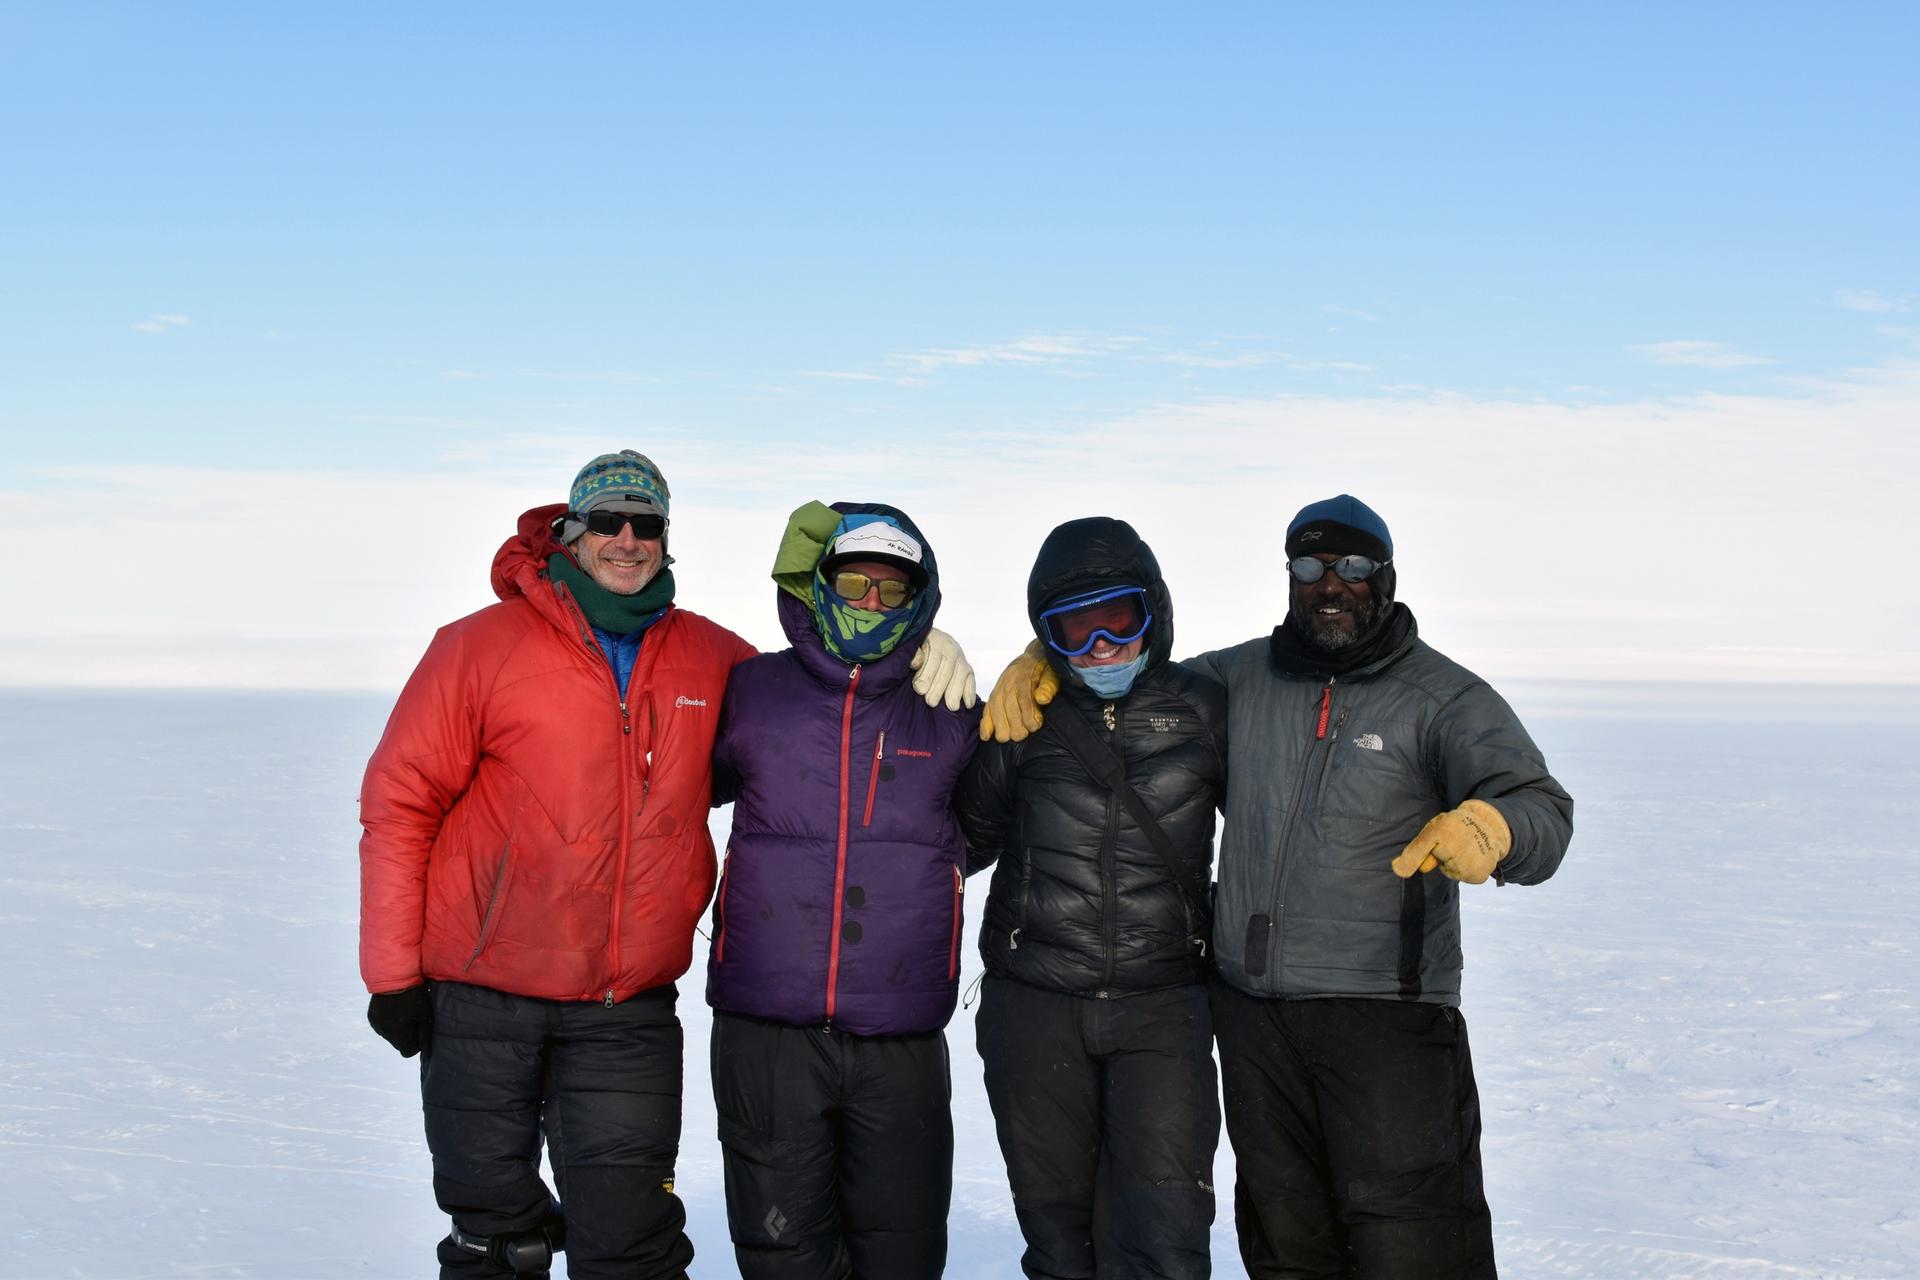 A group of four people pose in cold weather gear. Behind them is a white, icy horizon.